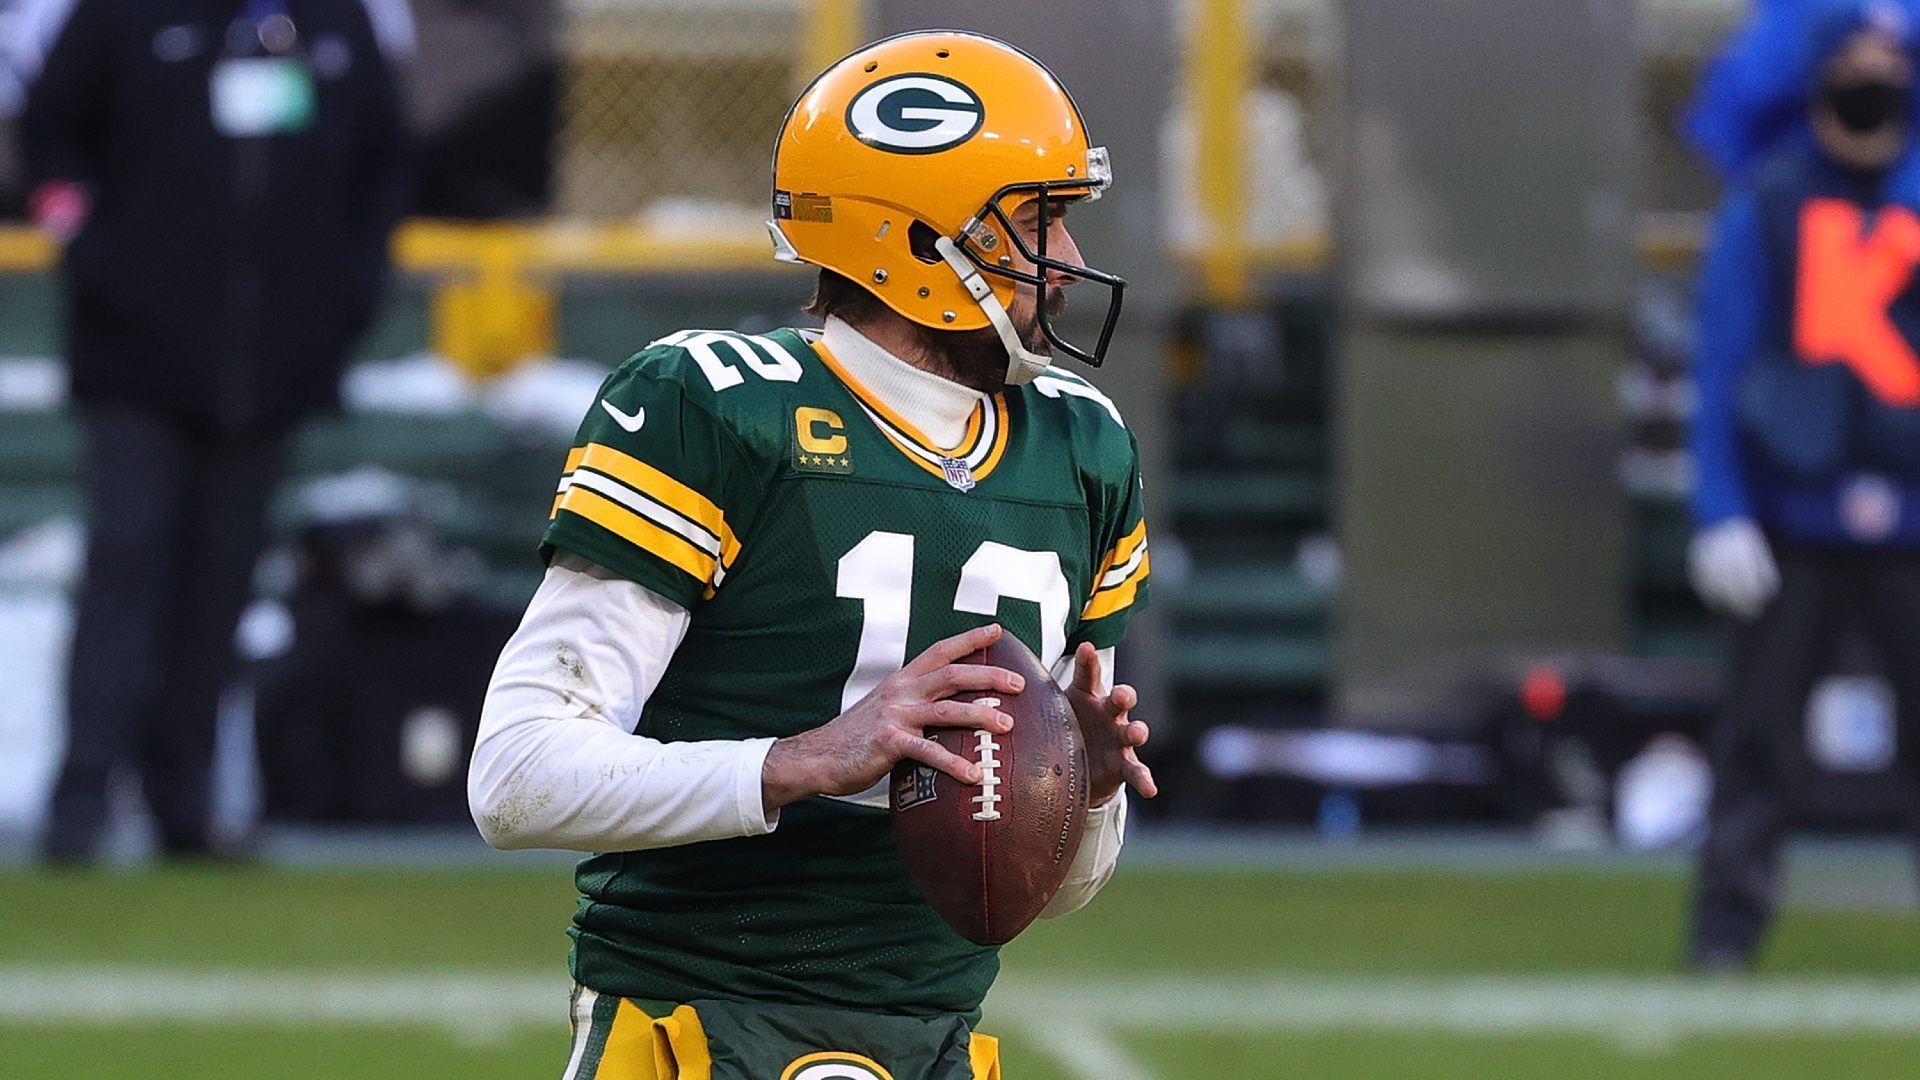 
                <strong>Platz 10: Aaron Rodgers (Home-Trikot)</strong><br>
                &#x2022; Team: Green Bay Packers - <br>&#x2022; Position: Quarterback - <br>&#x2022; seit 2005 in der NFL<br>
              